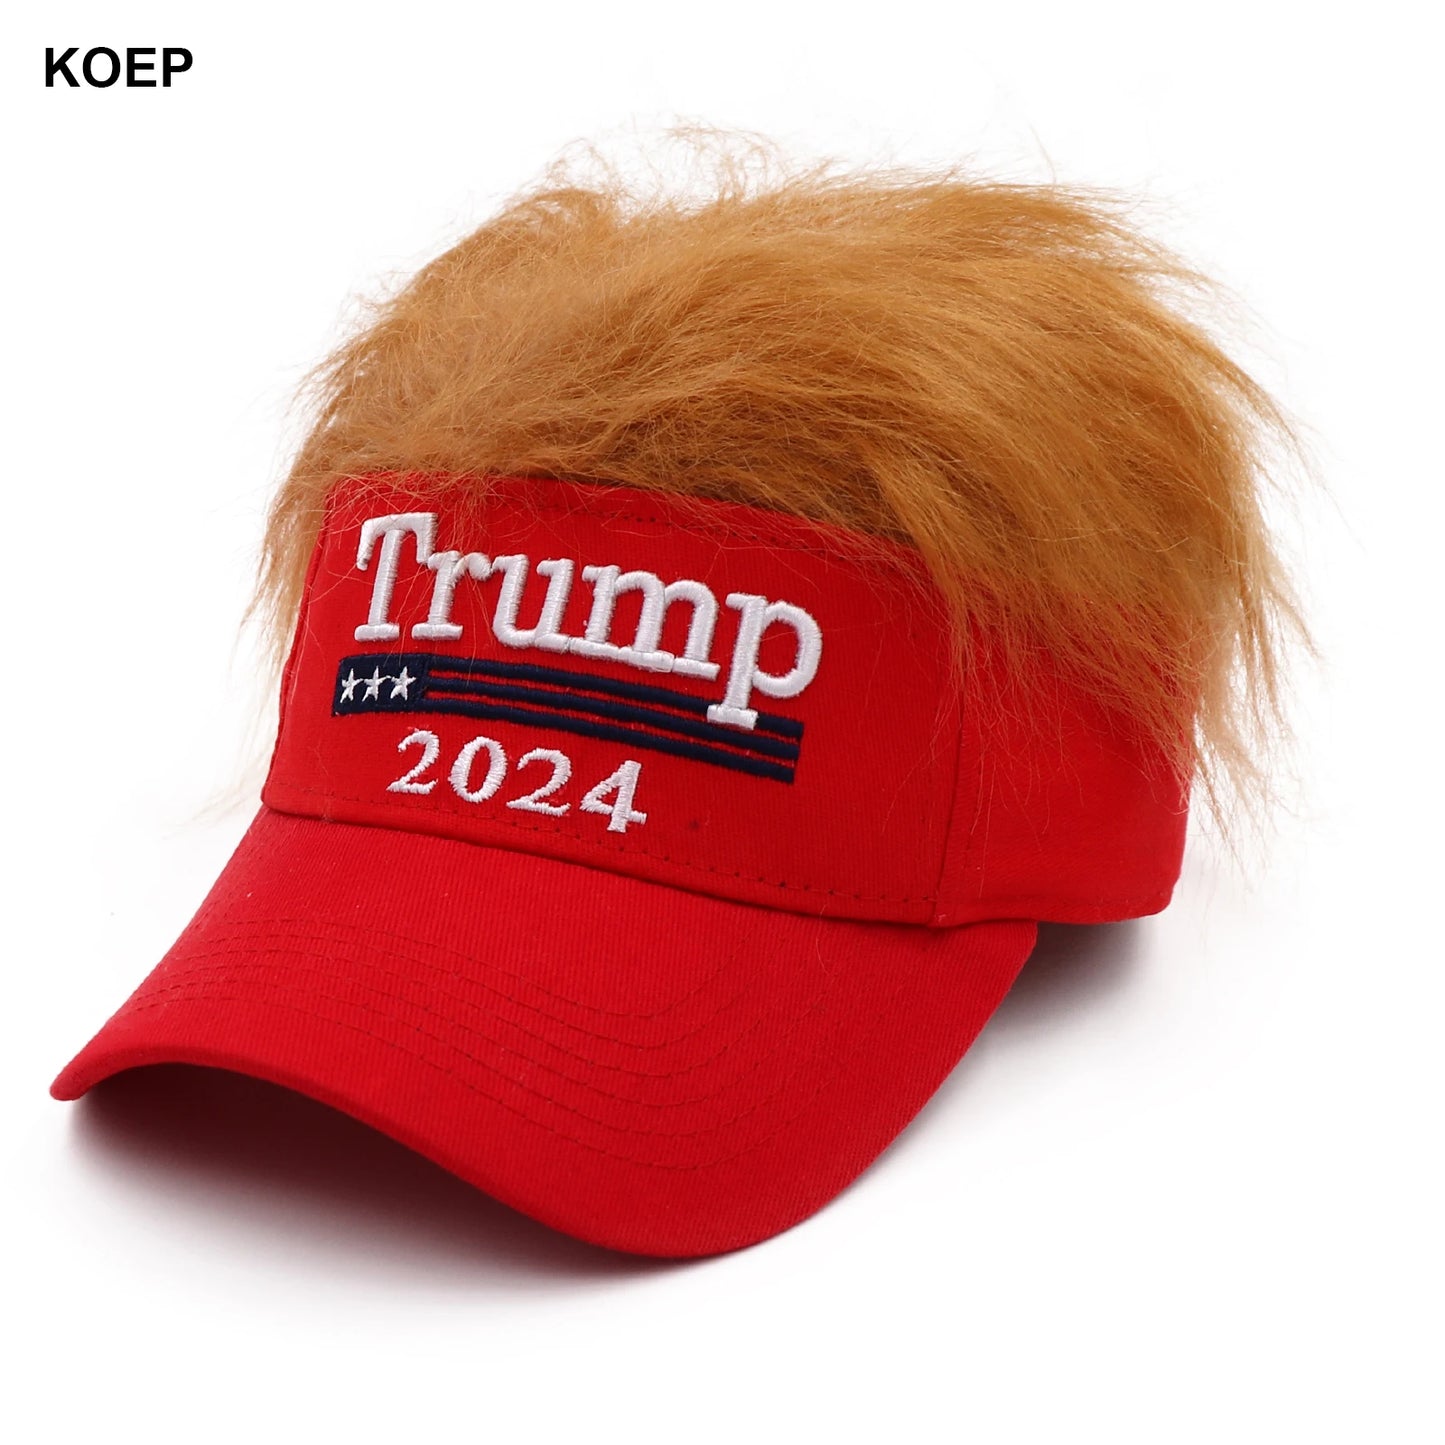 Pro-Trump - Donald Trump 2024 Hat with Hair